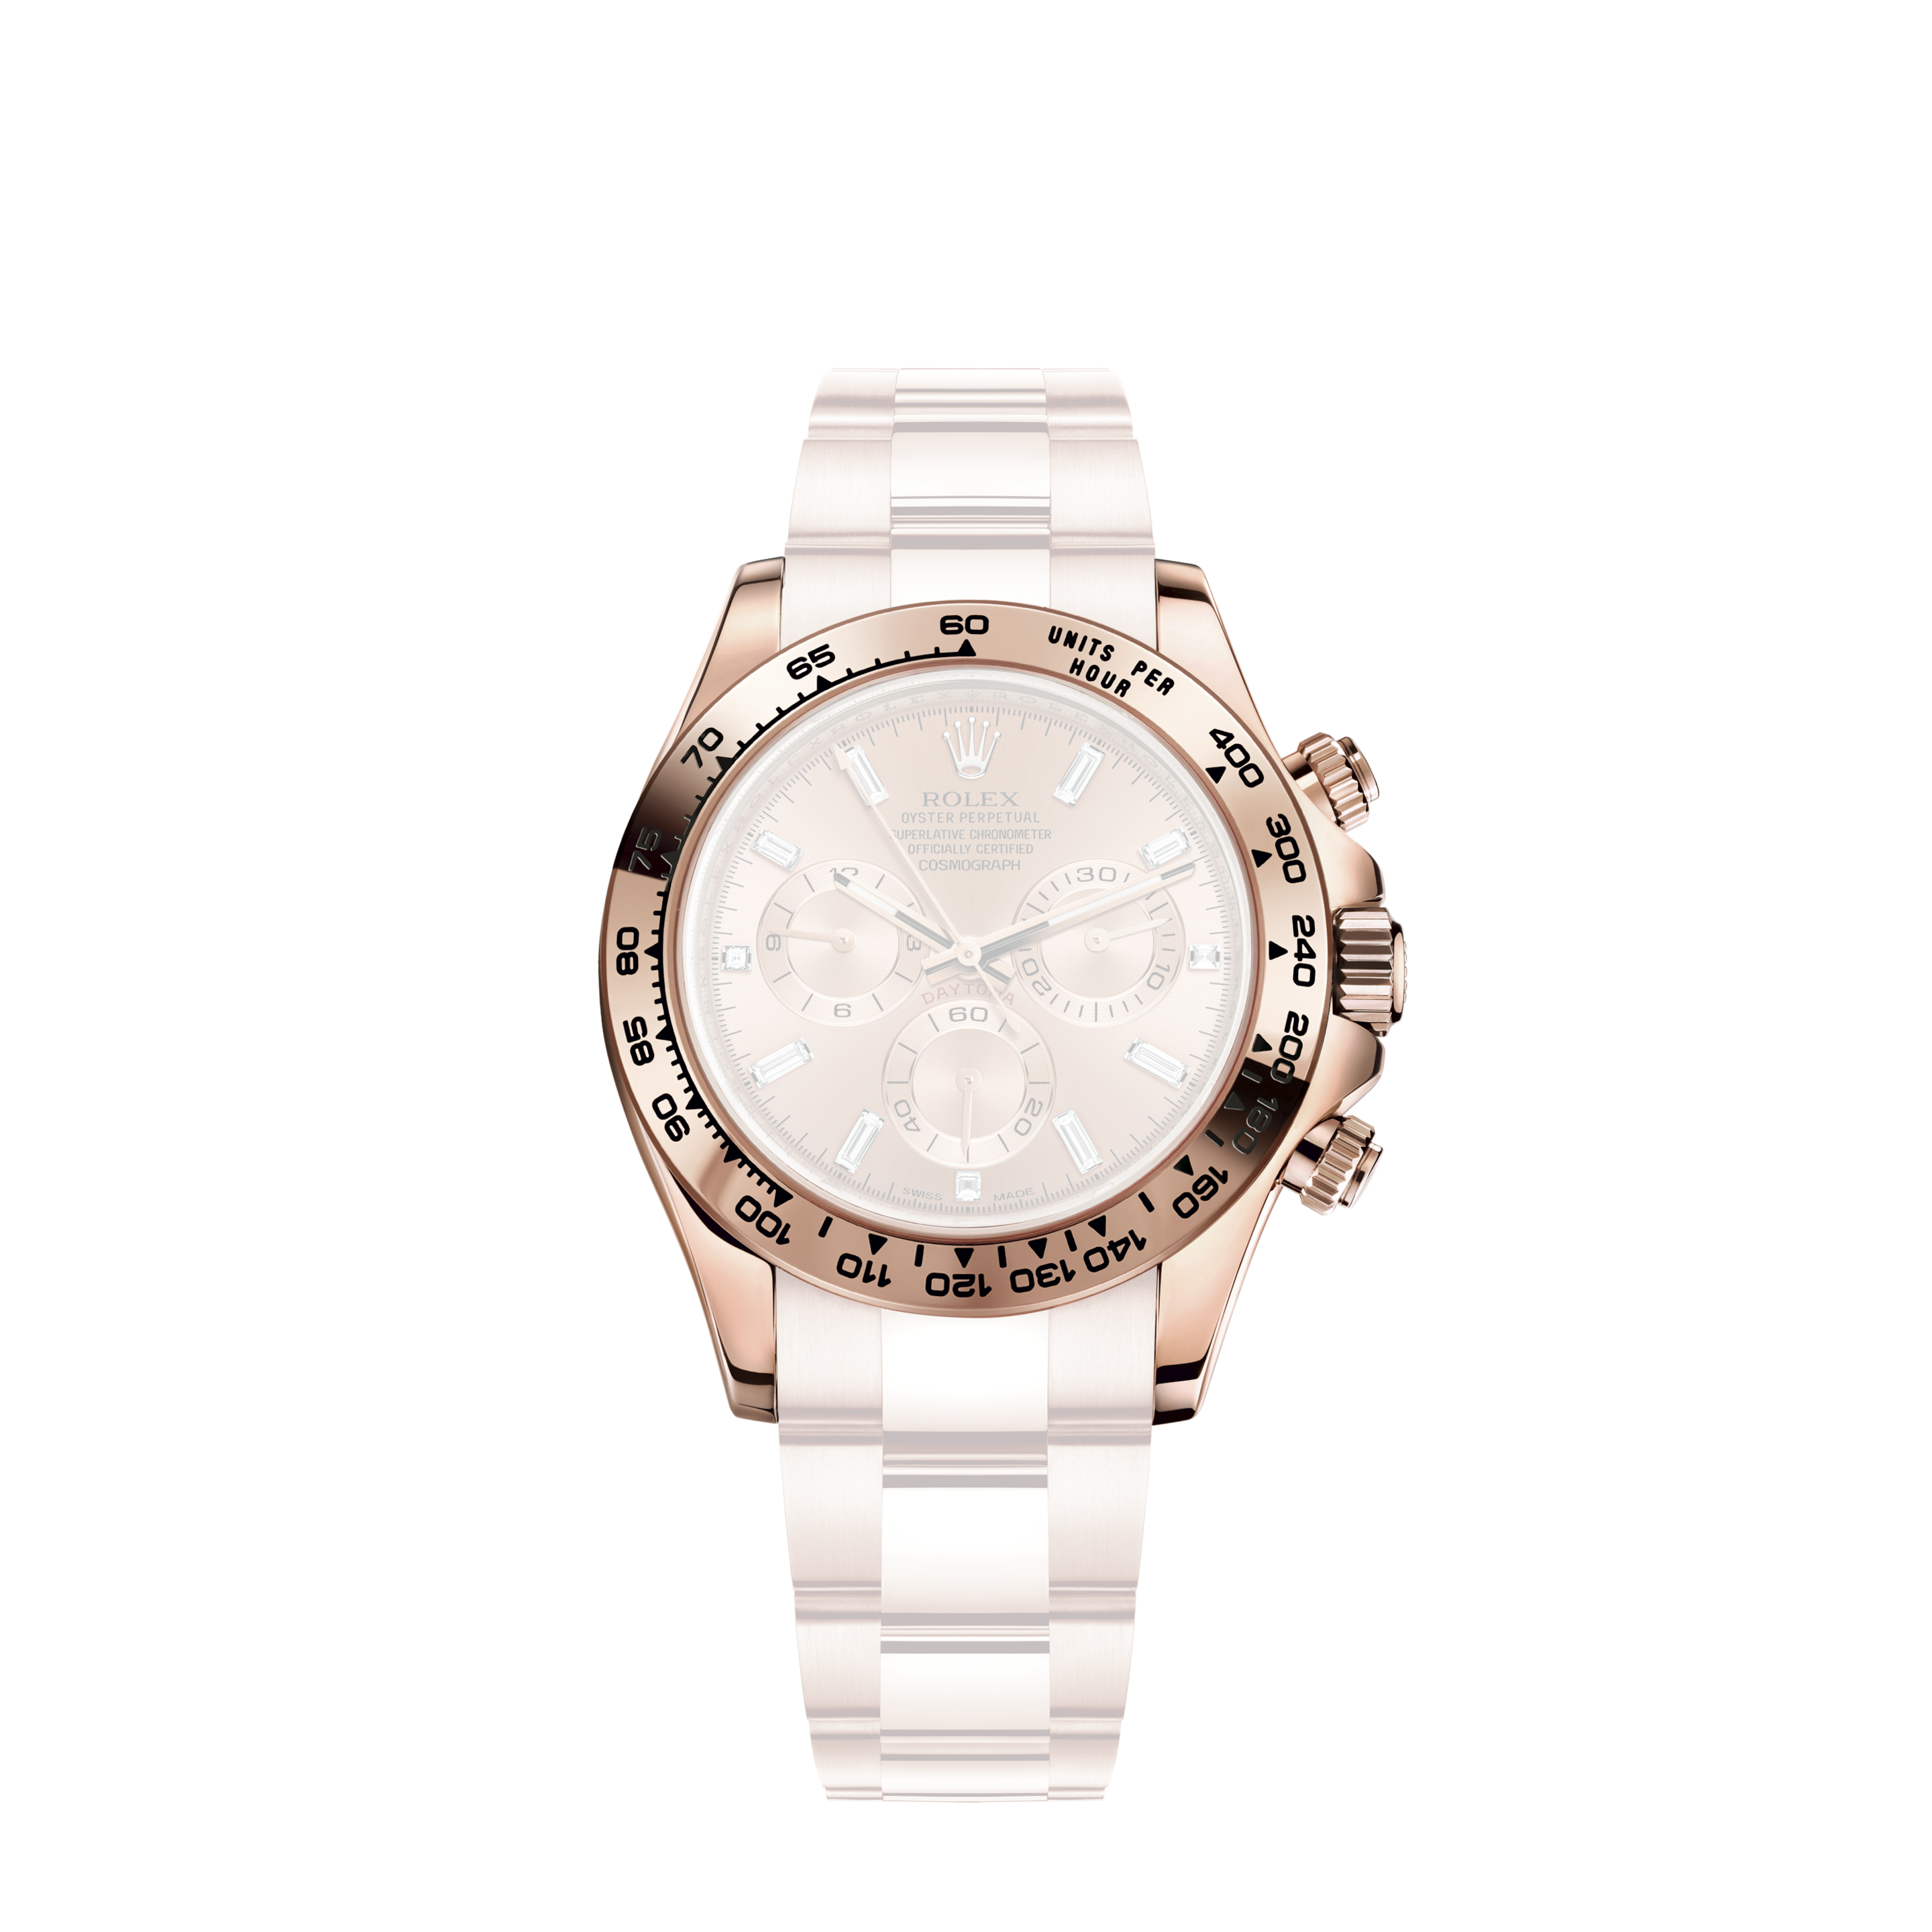 Rolex Datejust 36 Stainless steel and Rose Gold Black Roman Dial Watch